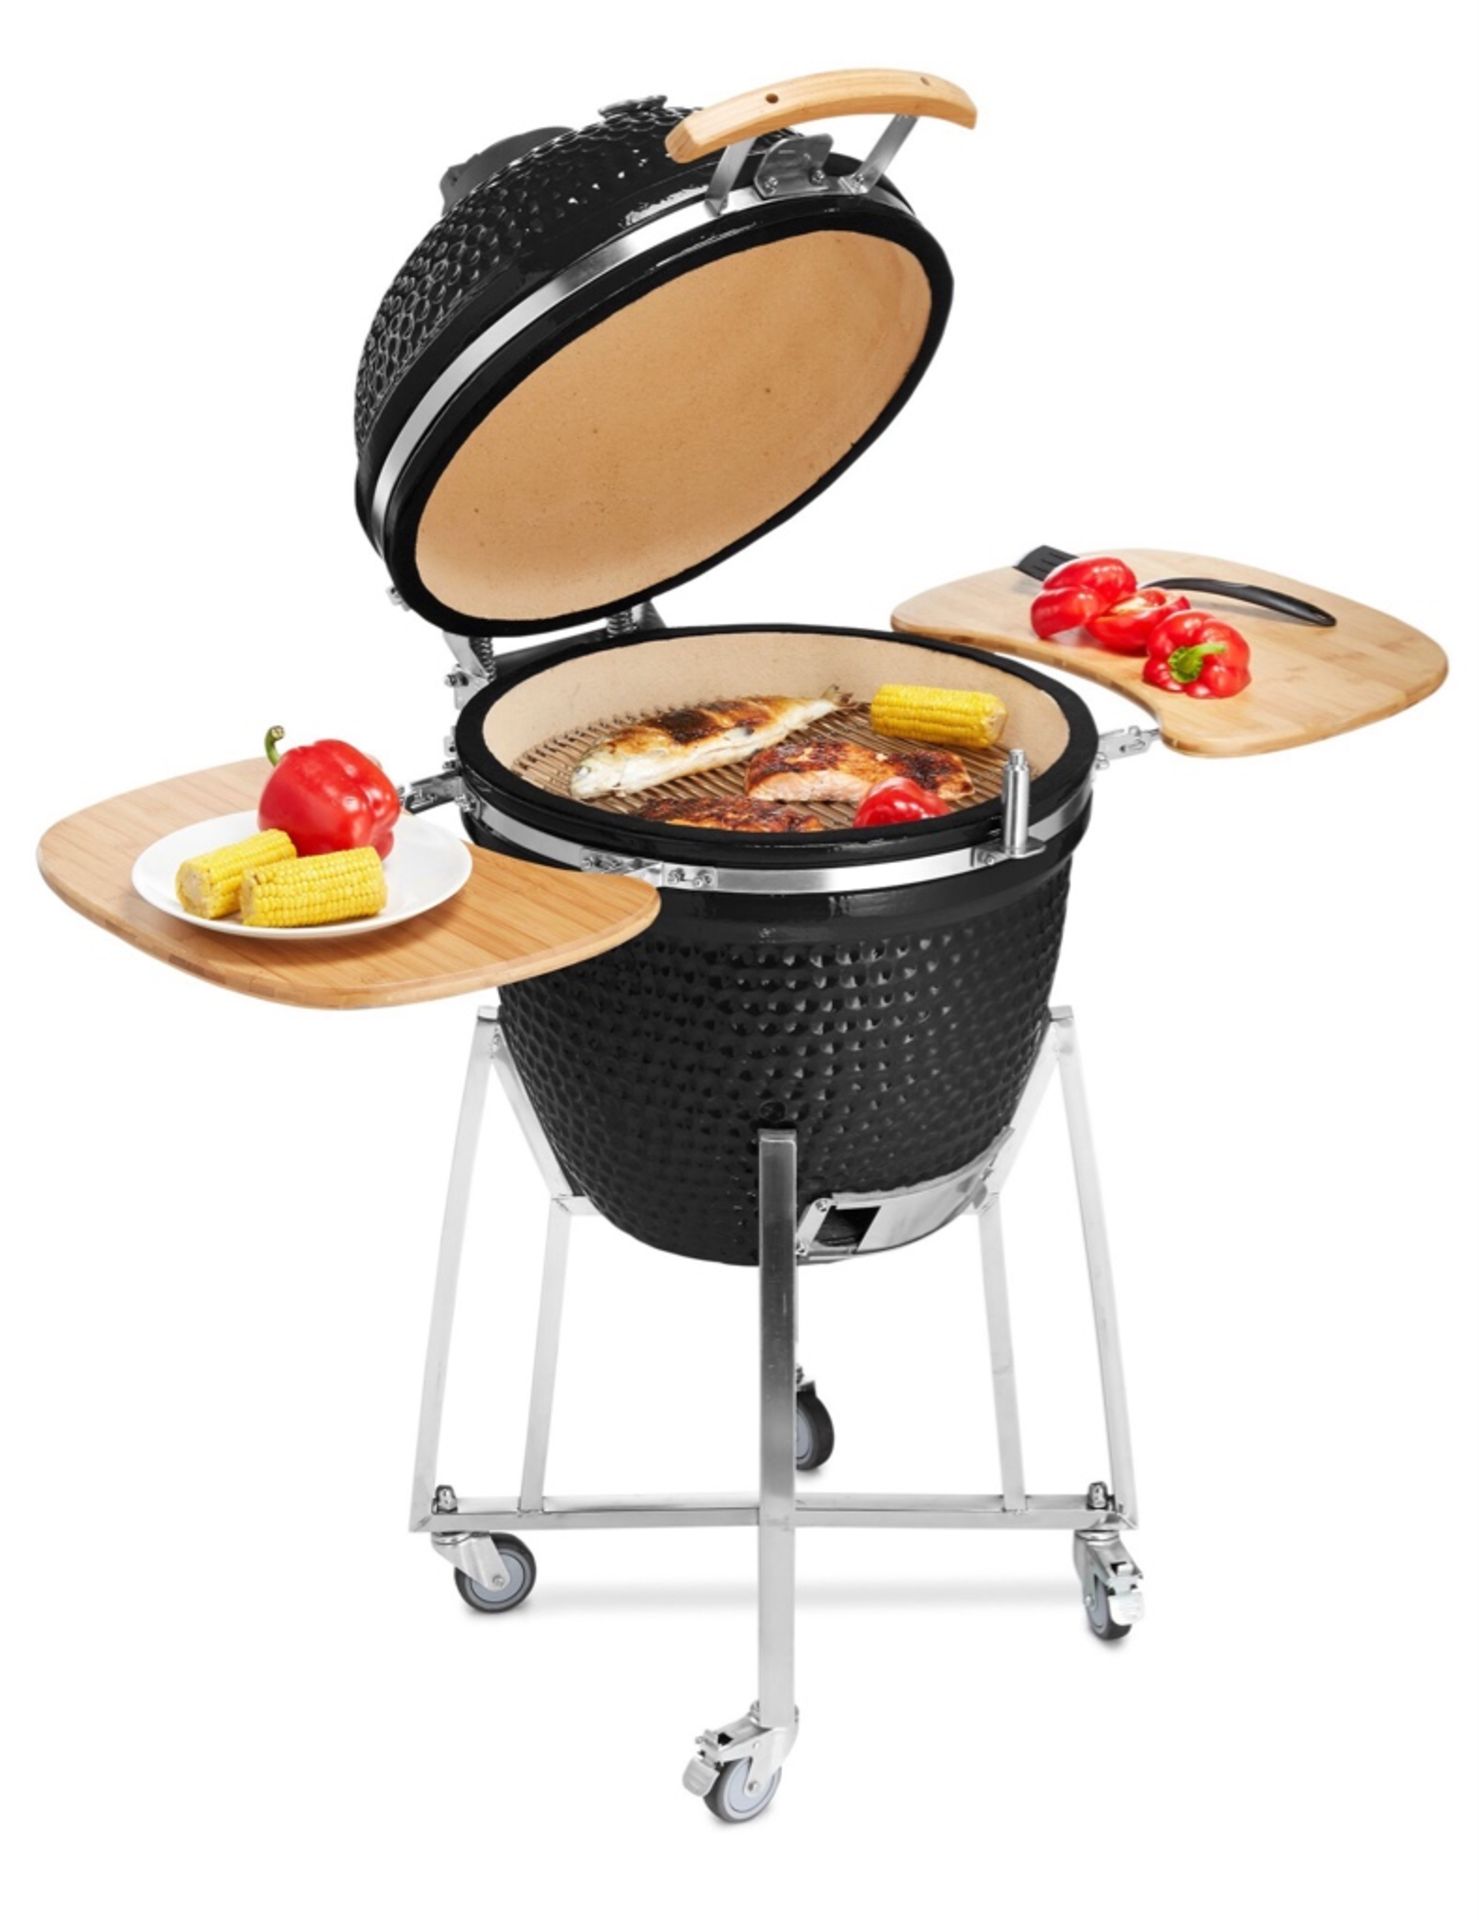 Brand new & boxed, Kamado 21 inch Ceramic BBQ Grill. Charcoal Smoker & Oven. - Image 3 of 4